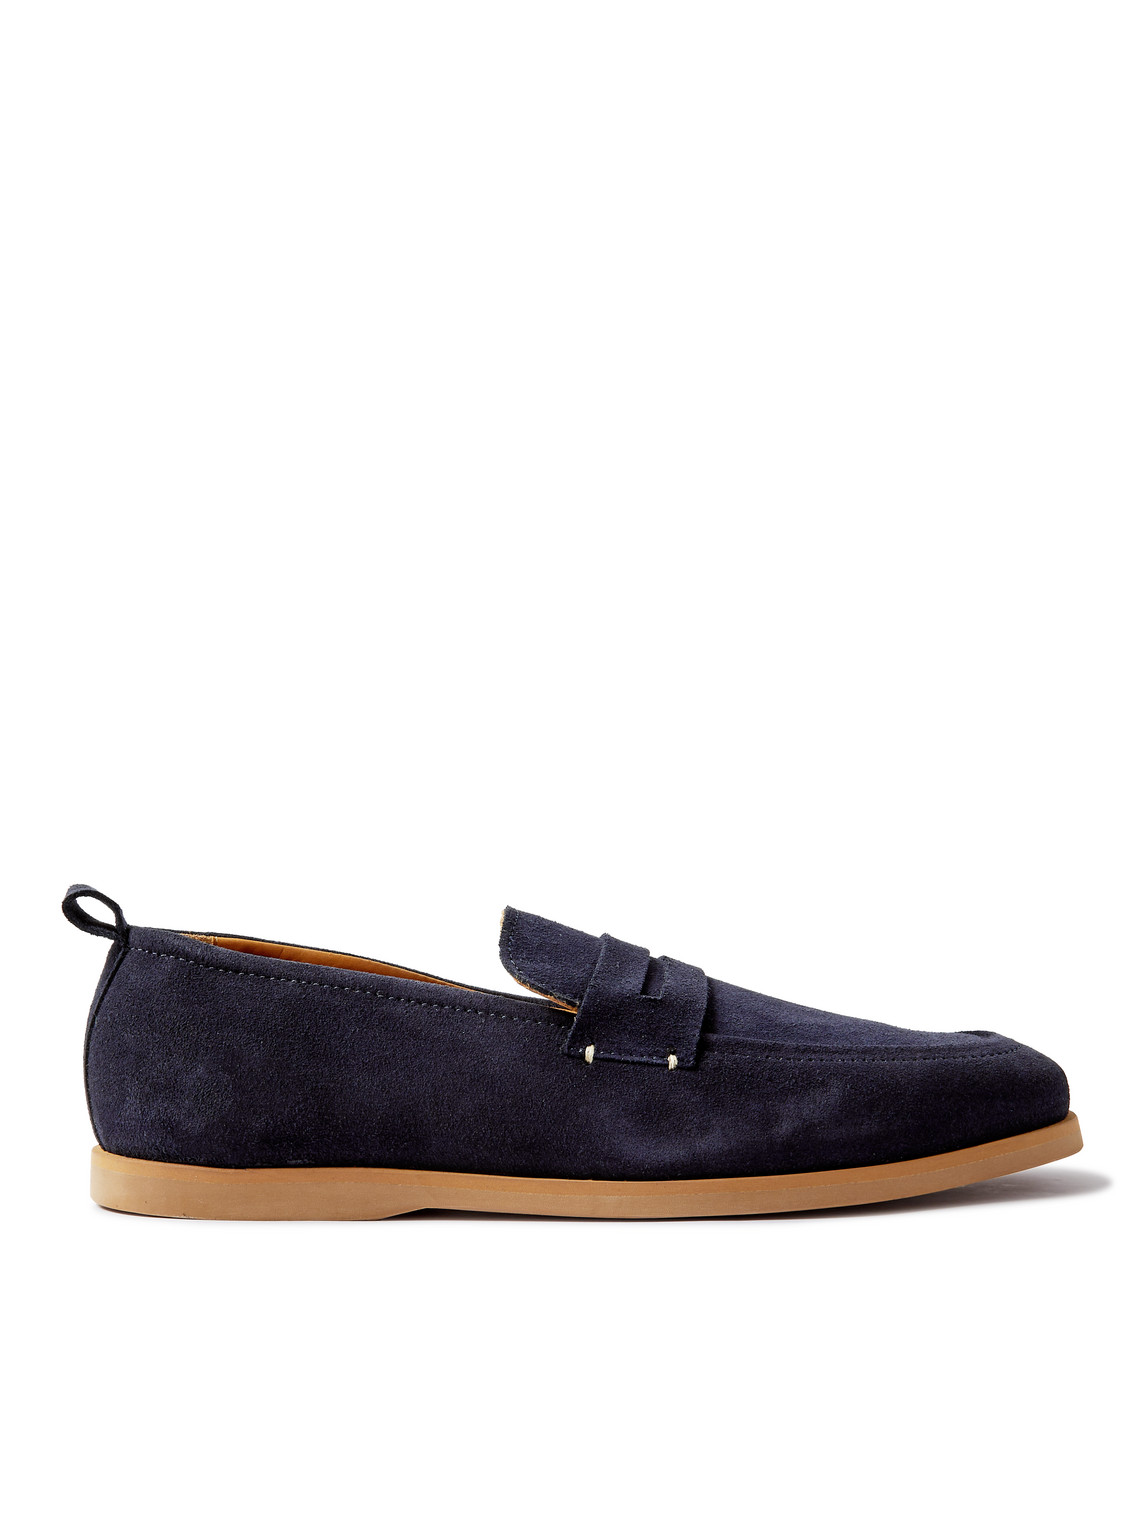 Mr P. - Regenerated Suede by evolo® Penny Loafers - Men - Blue - UK 8 von Mr P.